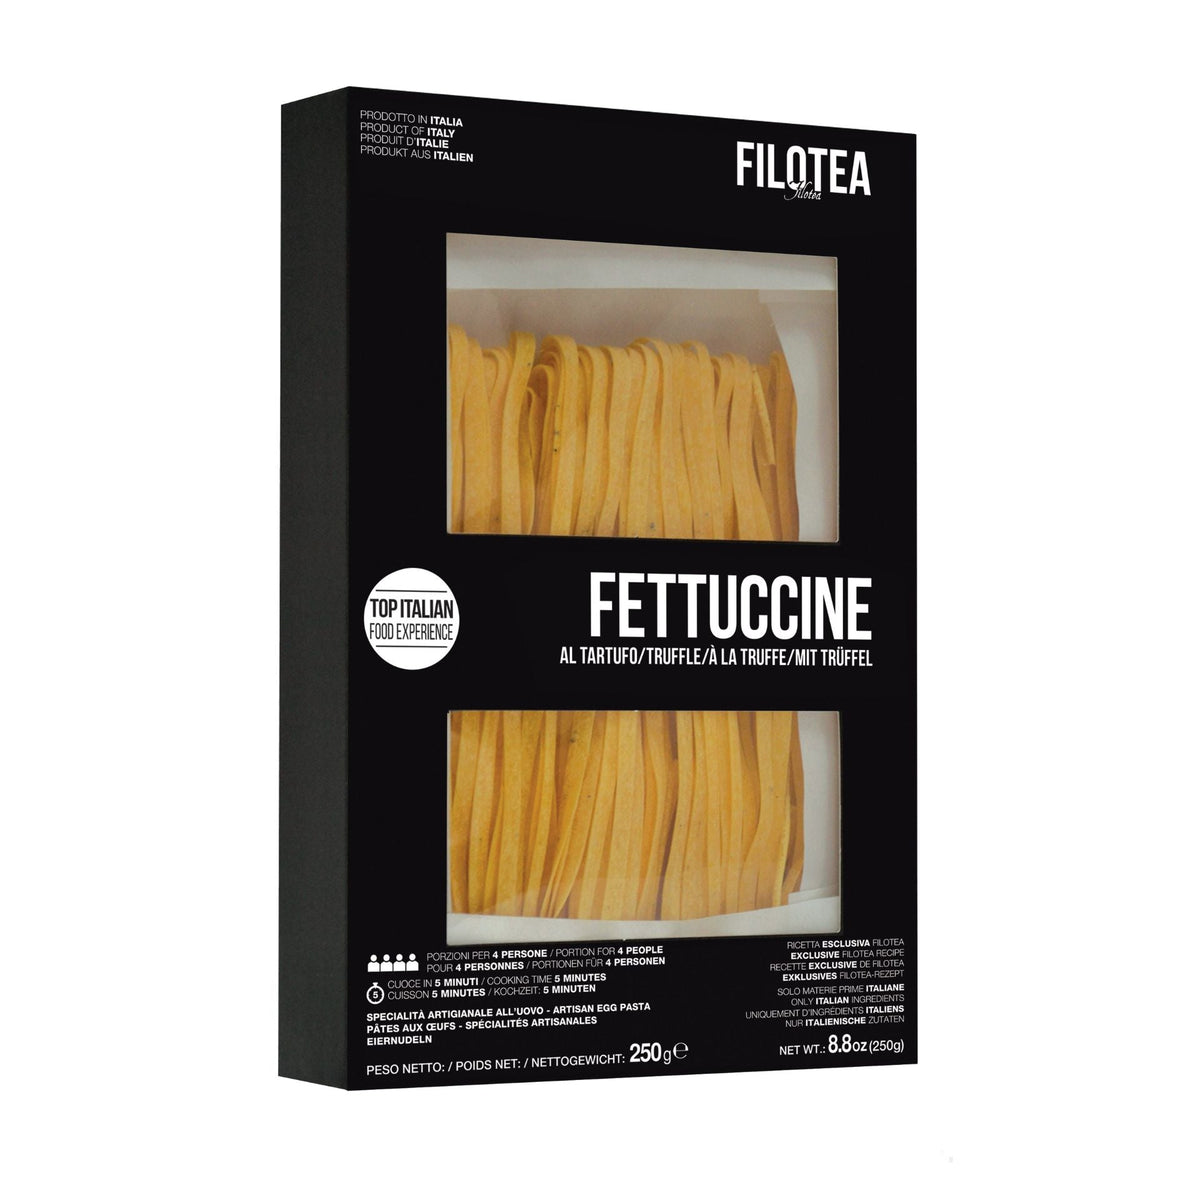 Filotea Truffle Fettuccine Artisan Egg Pasta 250g  | Imported and distributed in the UK by Just Gourmet Foods